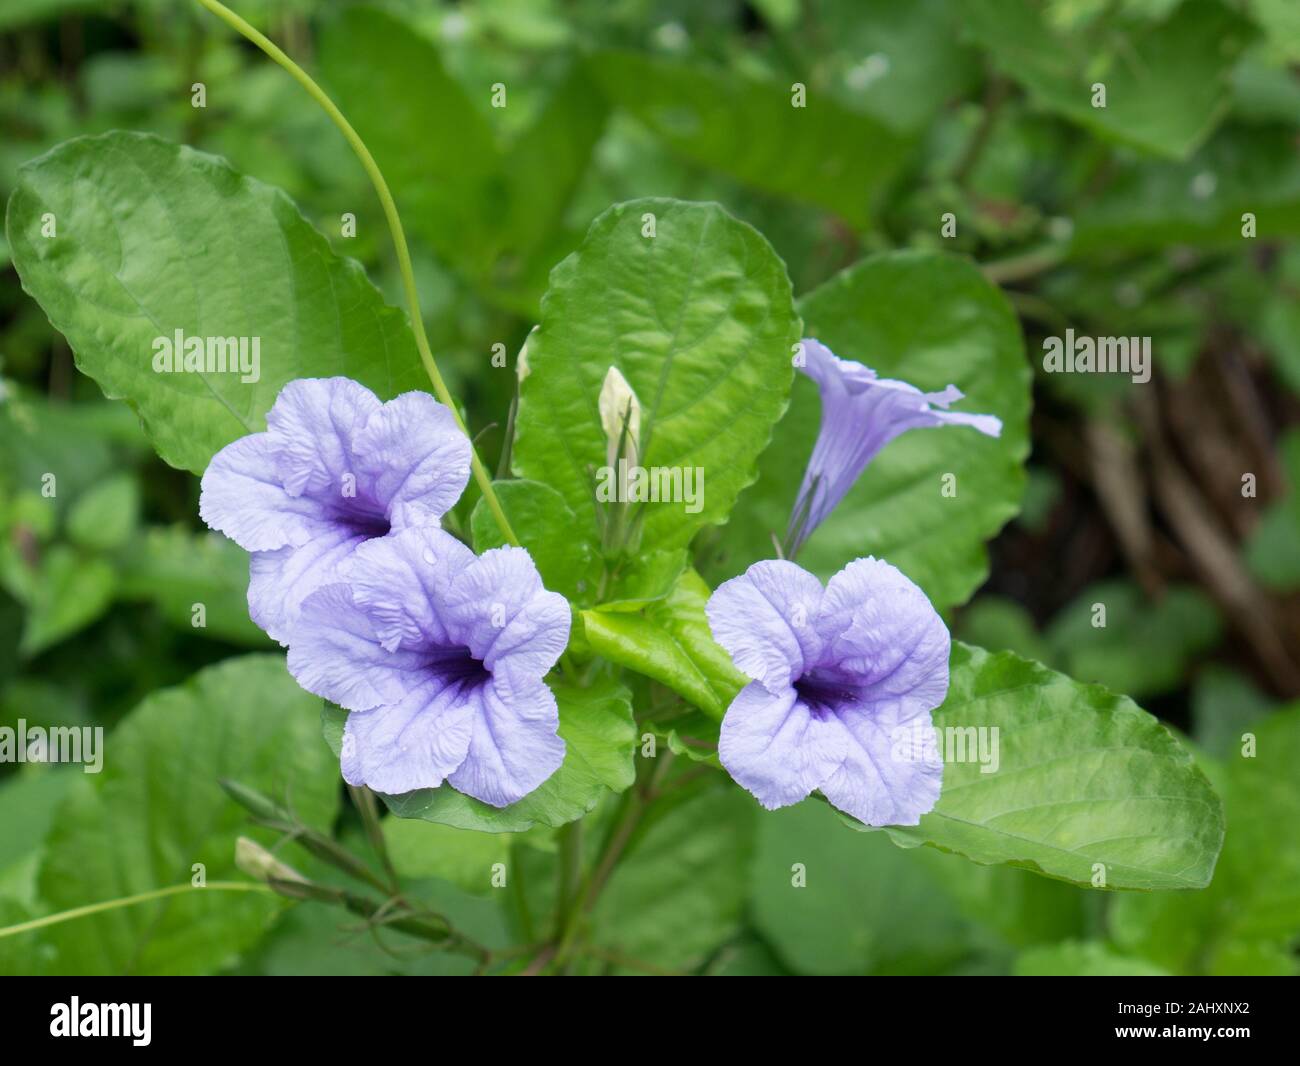 Mexican petunia flowers bloom in the middle of green leaves. Stock Photo